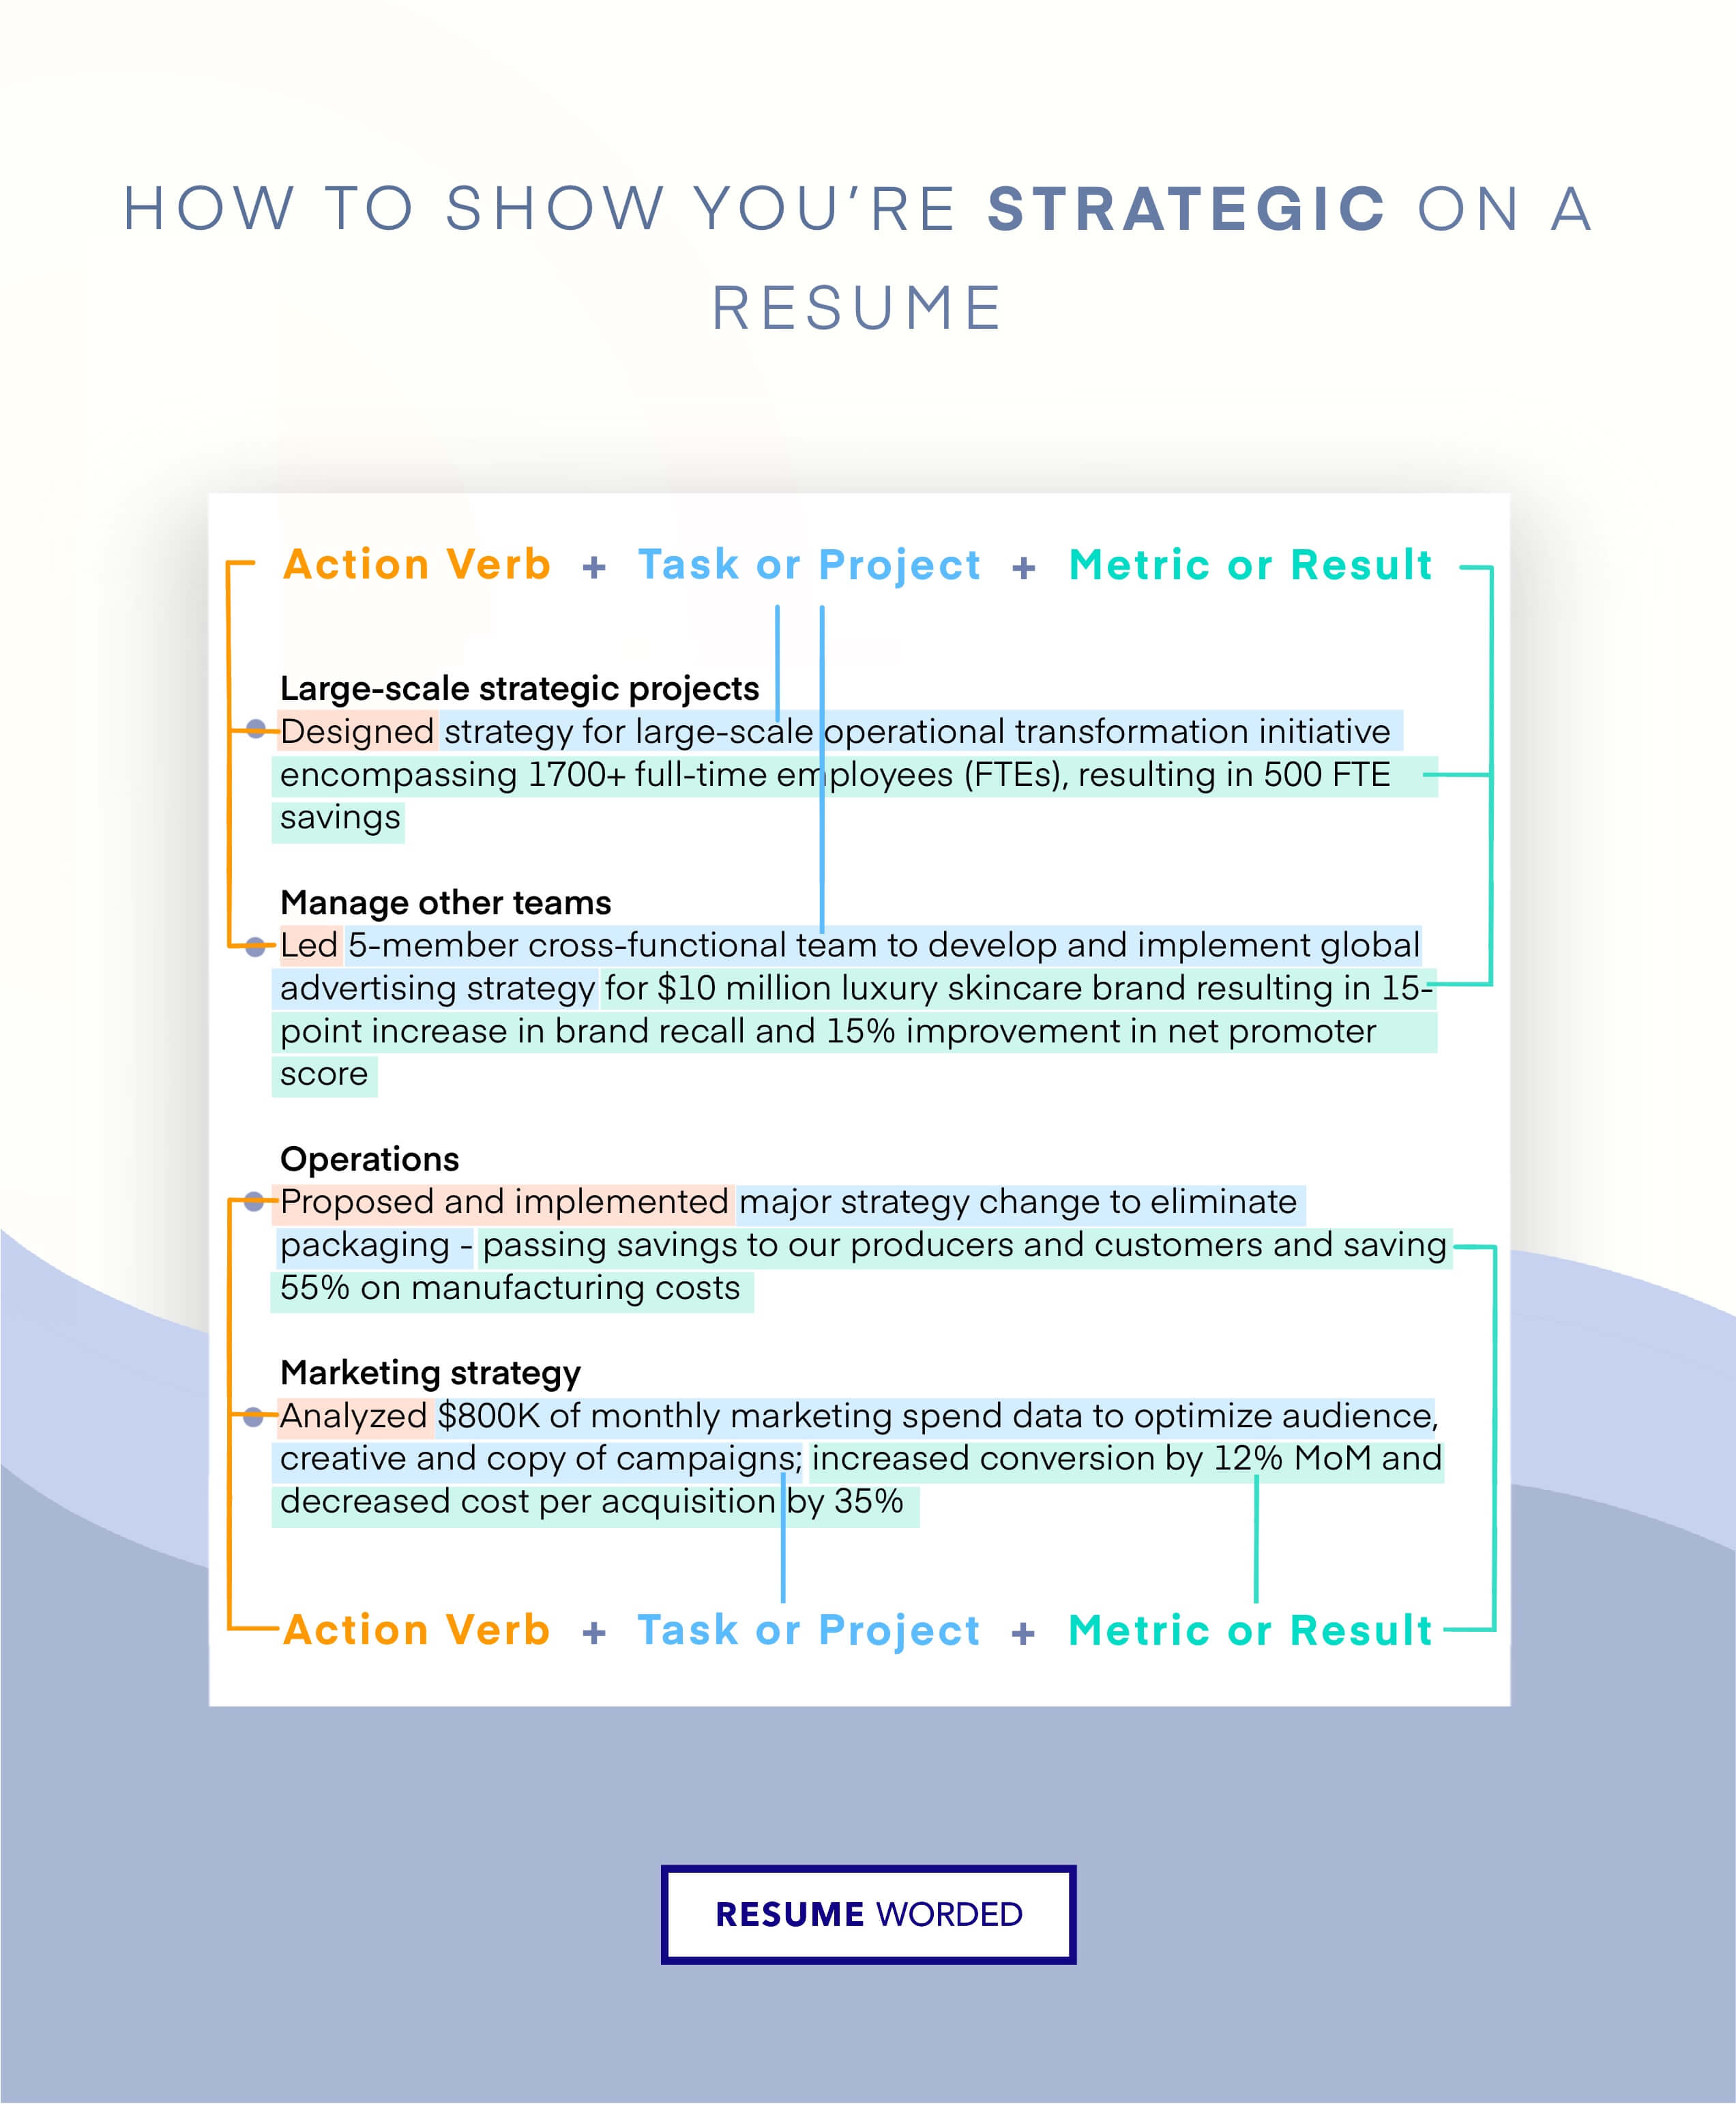 Demonstrate your strategic decision-making abilities - Account Manager CV